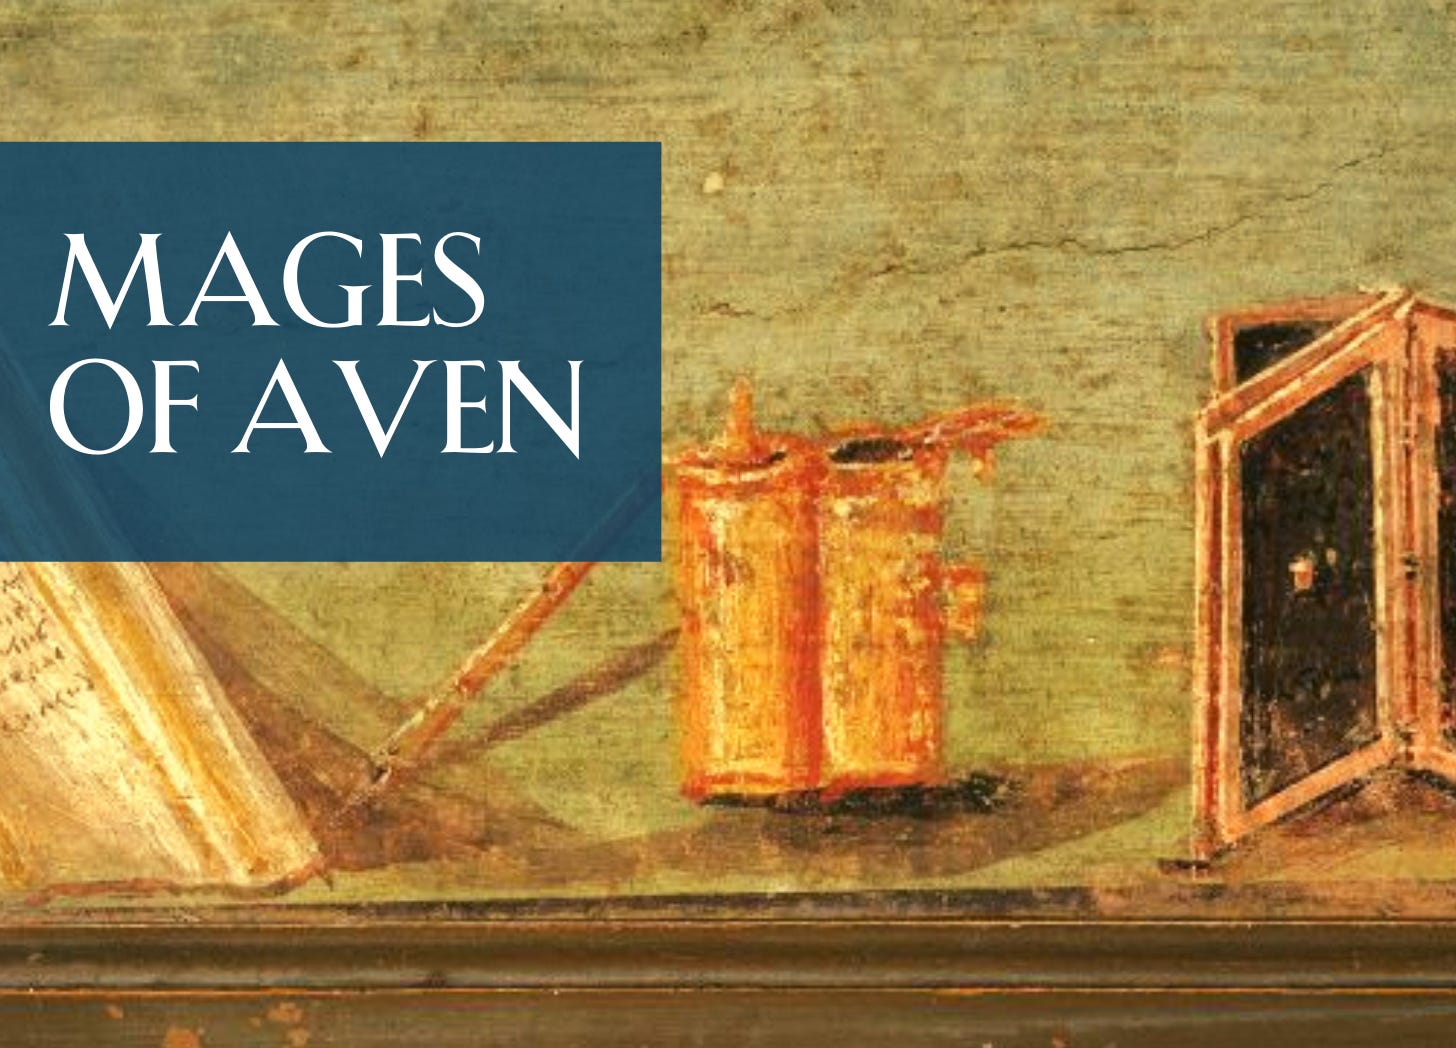 Roman fresco showing scrolls and wax tablets | Text overlaid: Mages of Aven